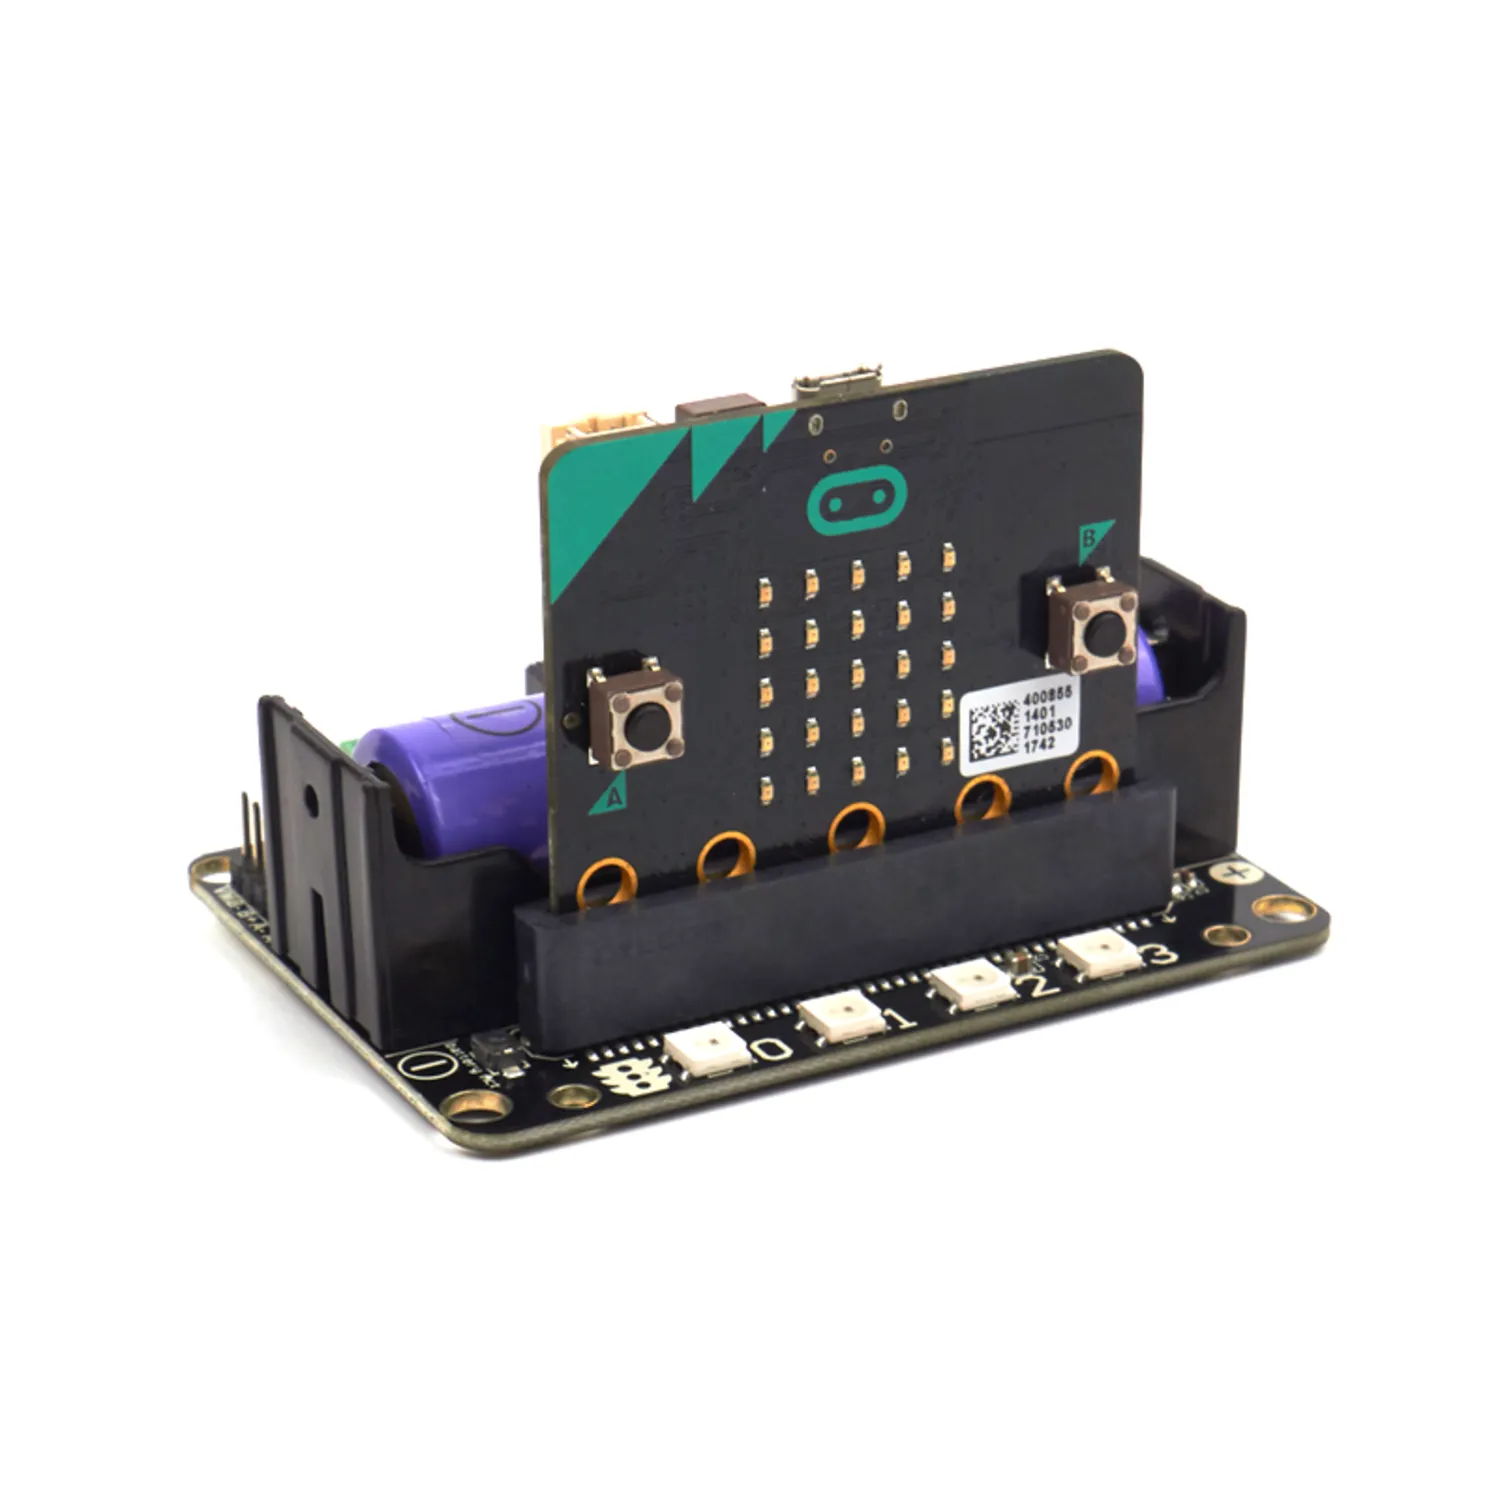 Photo of RobotBit - Robot Expansion Board for Micro:bit